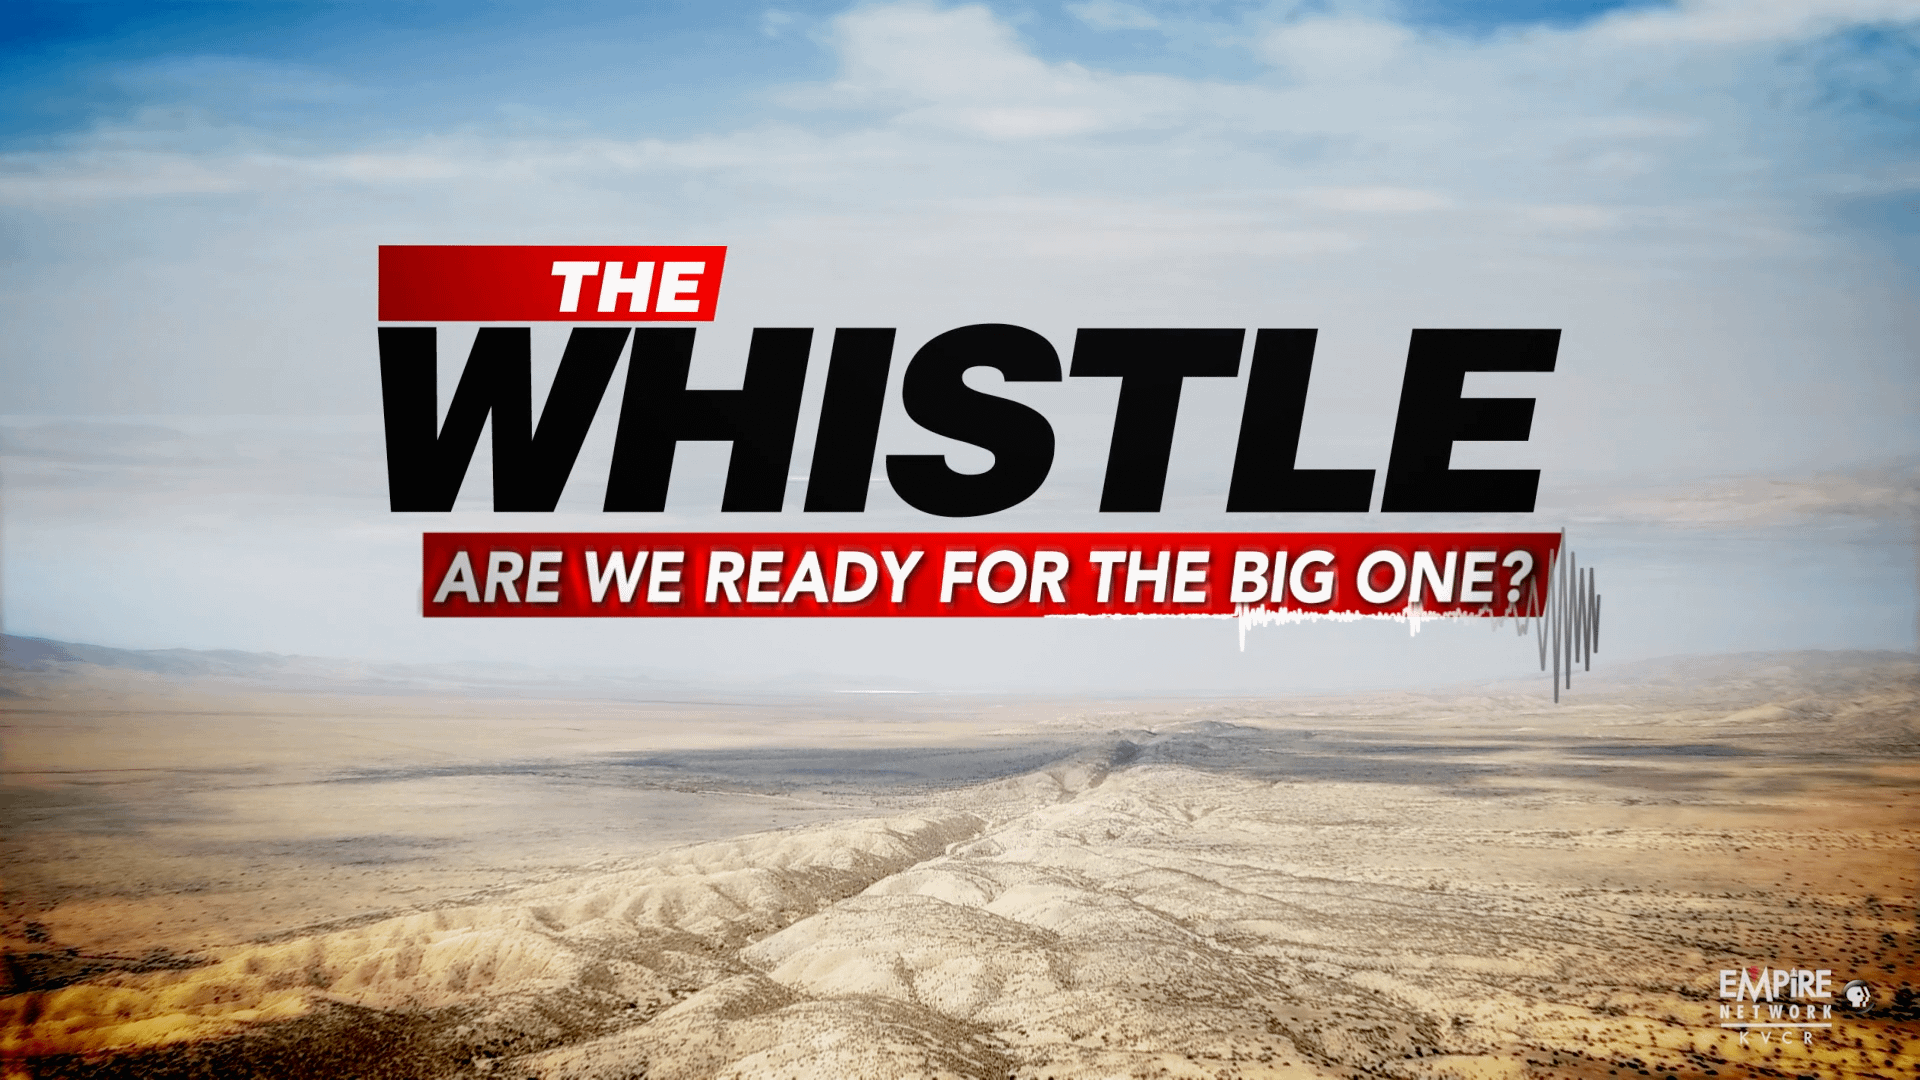 The Whistle: Are We Ready for the Big One?